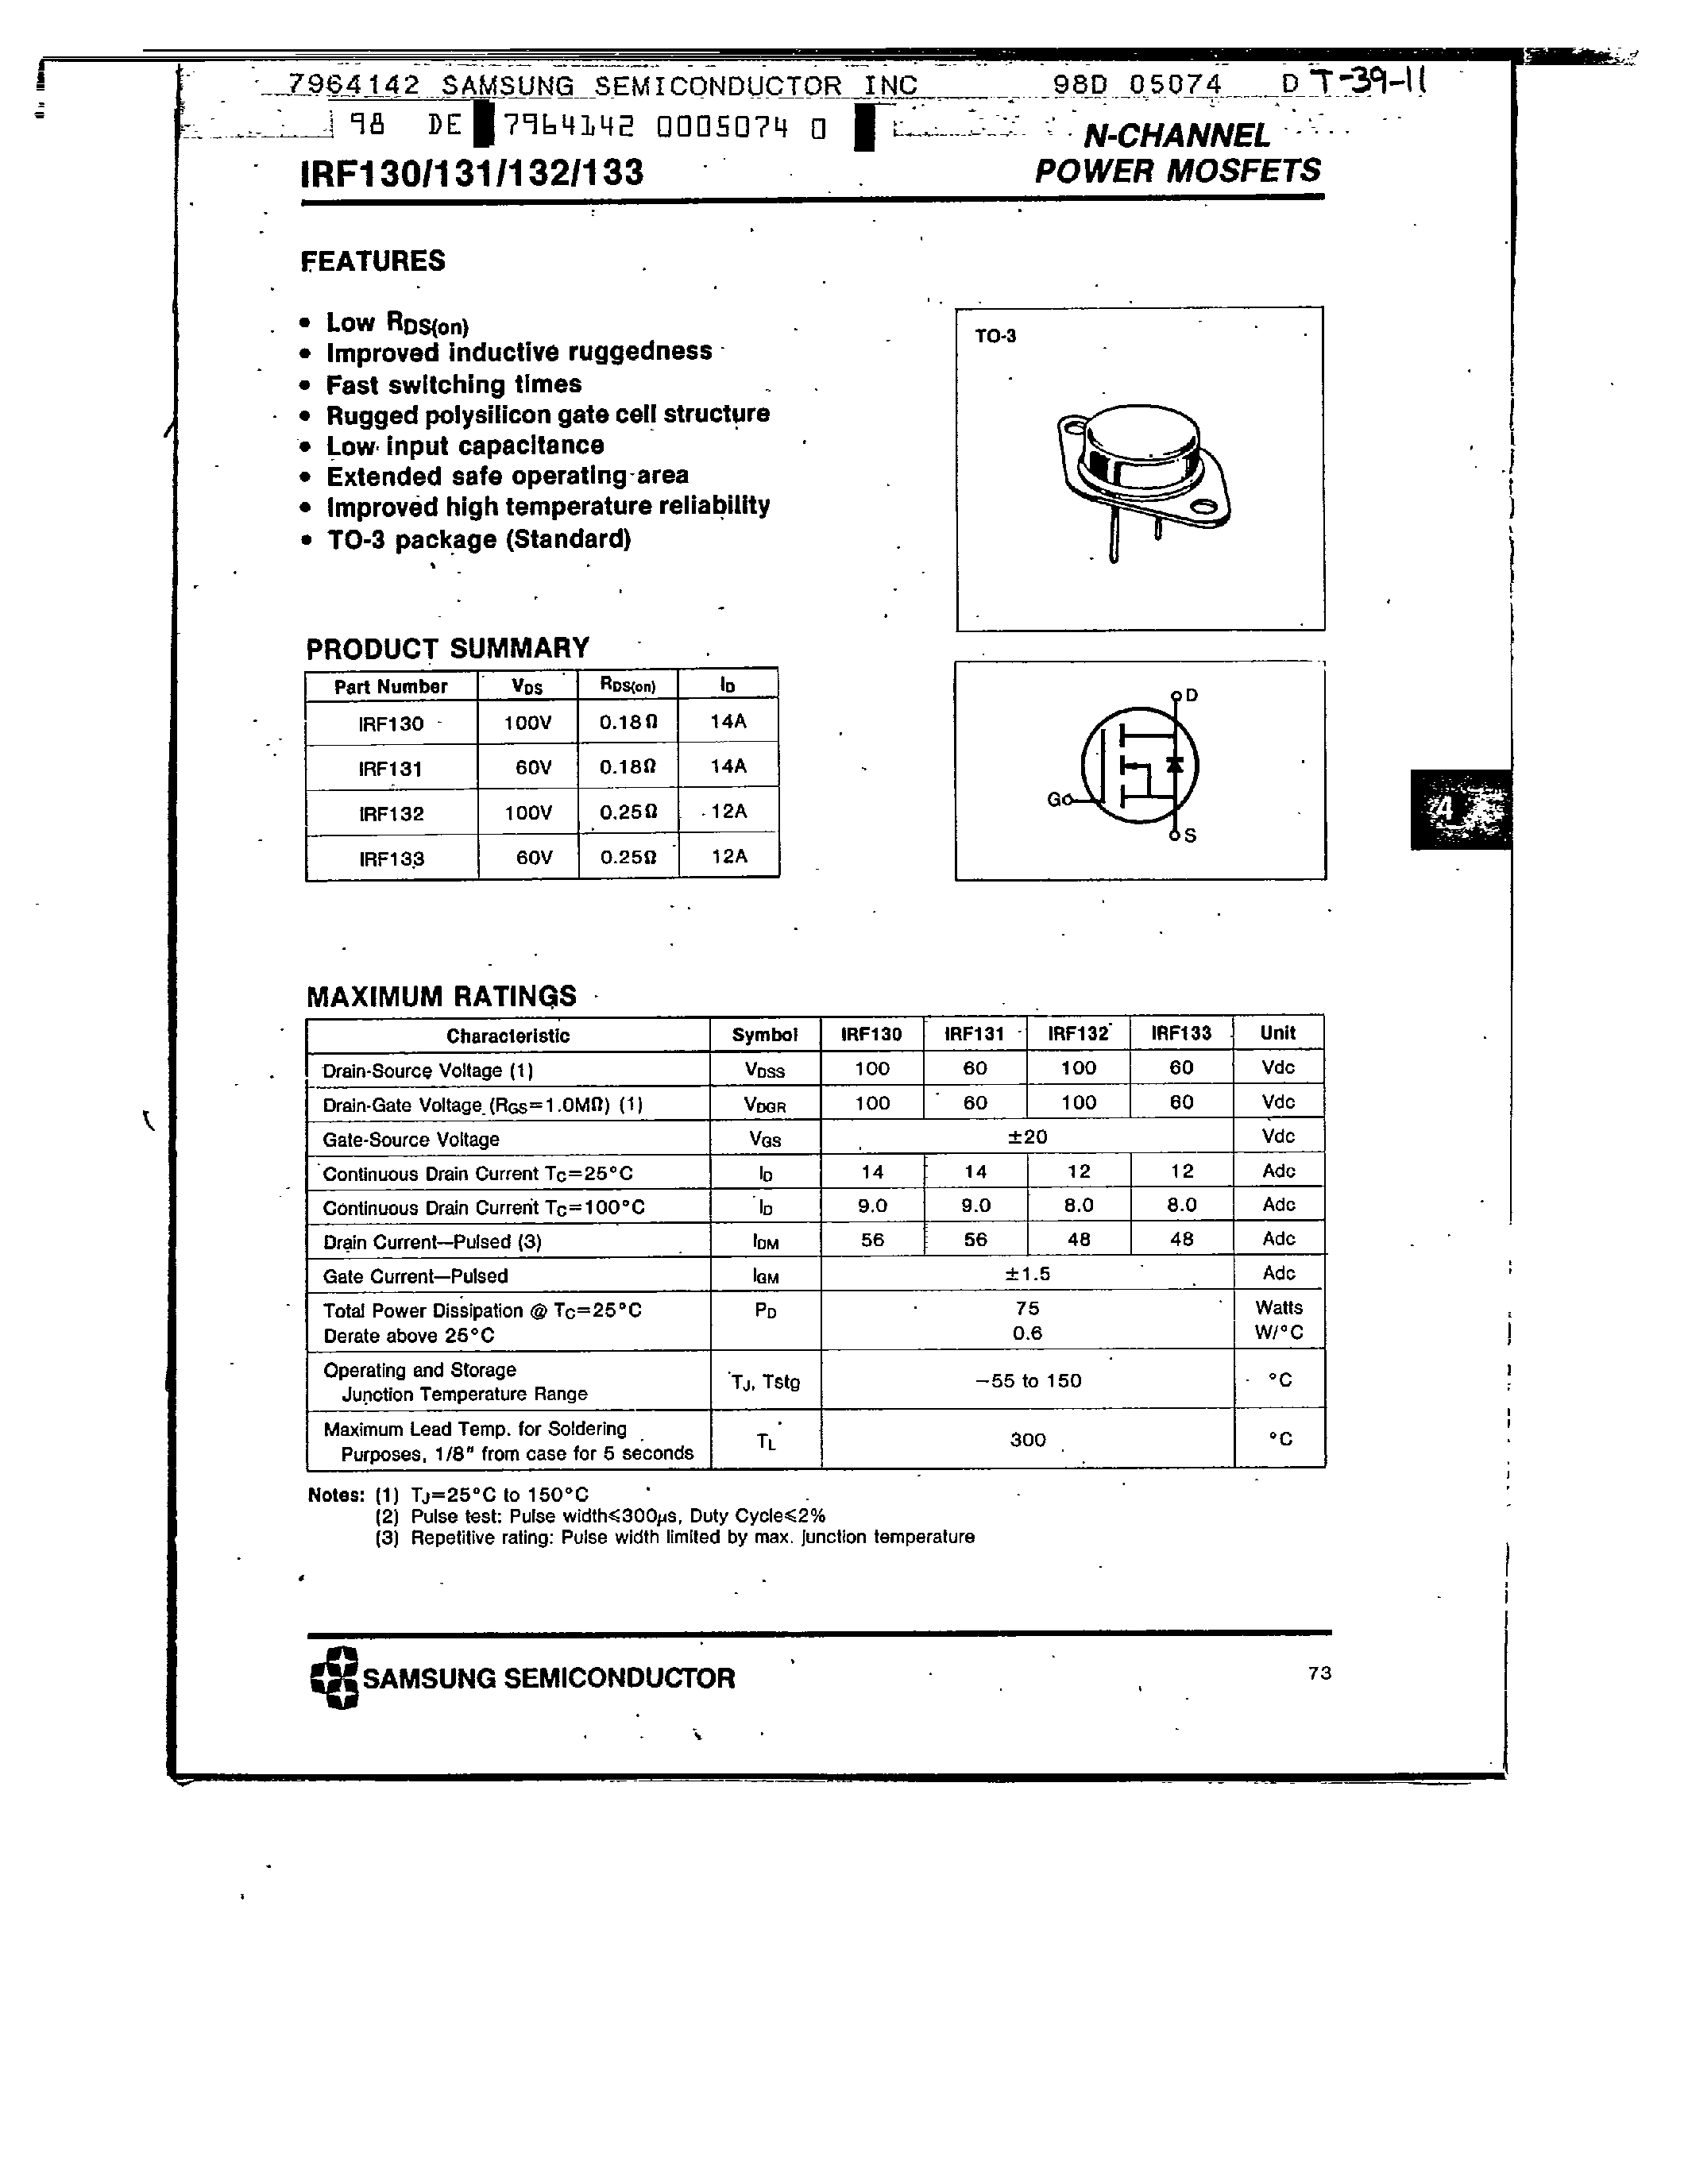 Даташит IRF130 - N-CHANNEL POWER MOSFETS страница 1